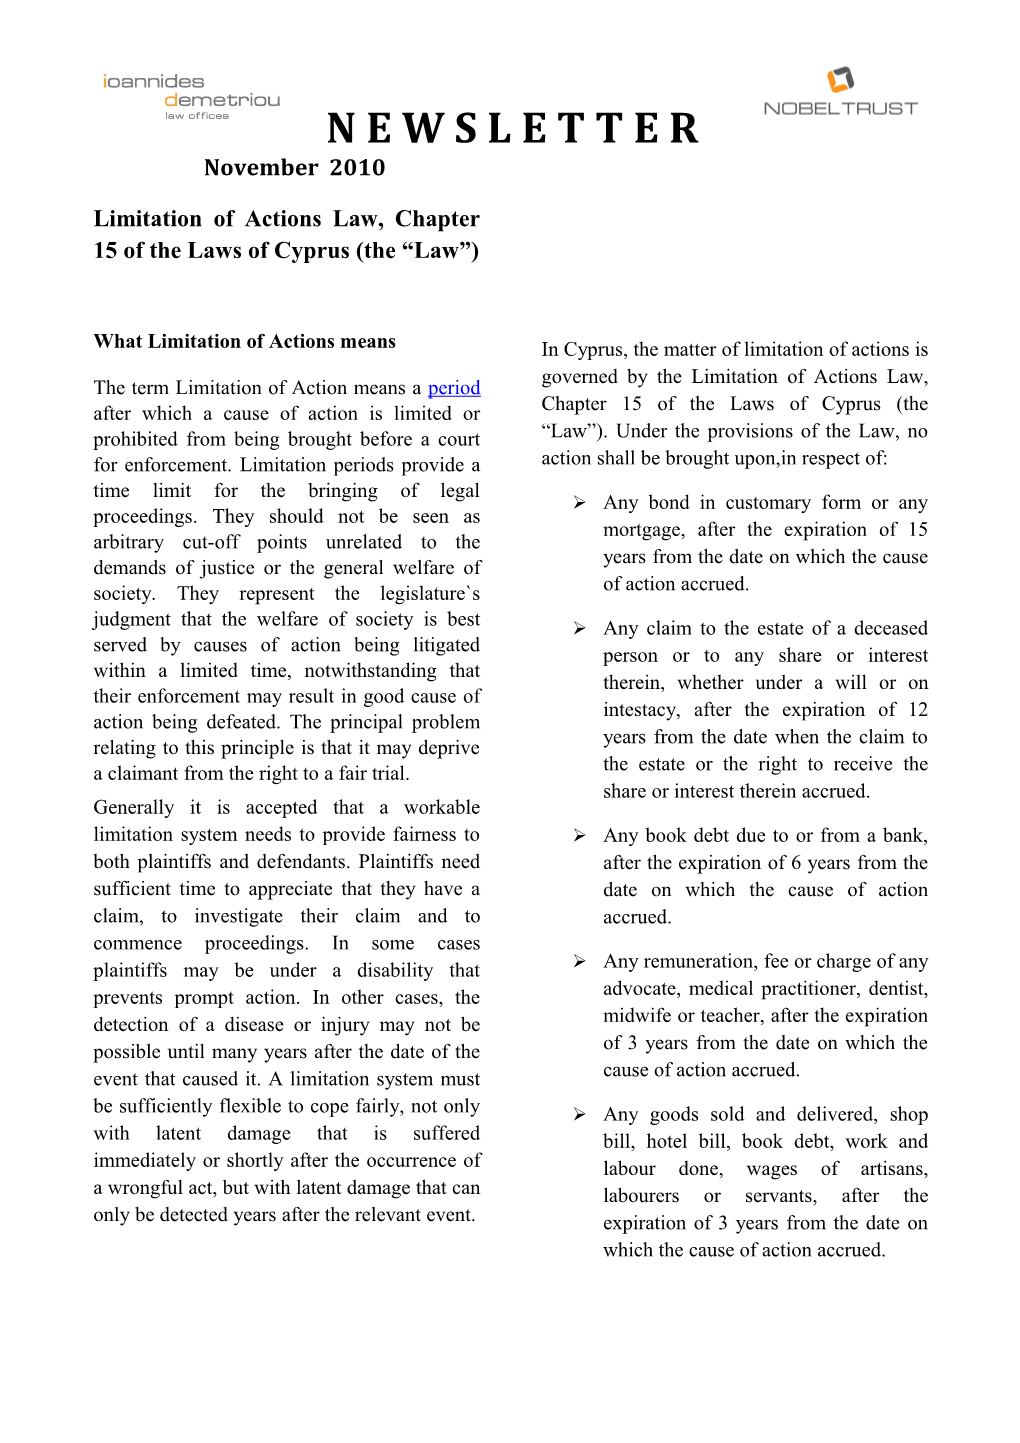 Limitation of Actions Law, Chapter 15 of the Laws of Cyprus (The Law )